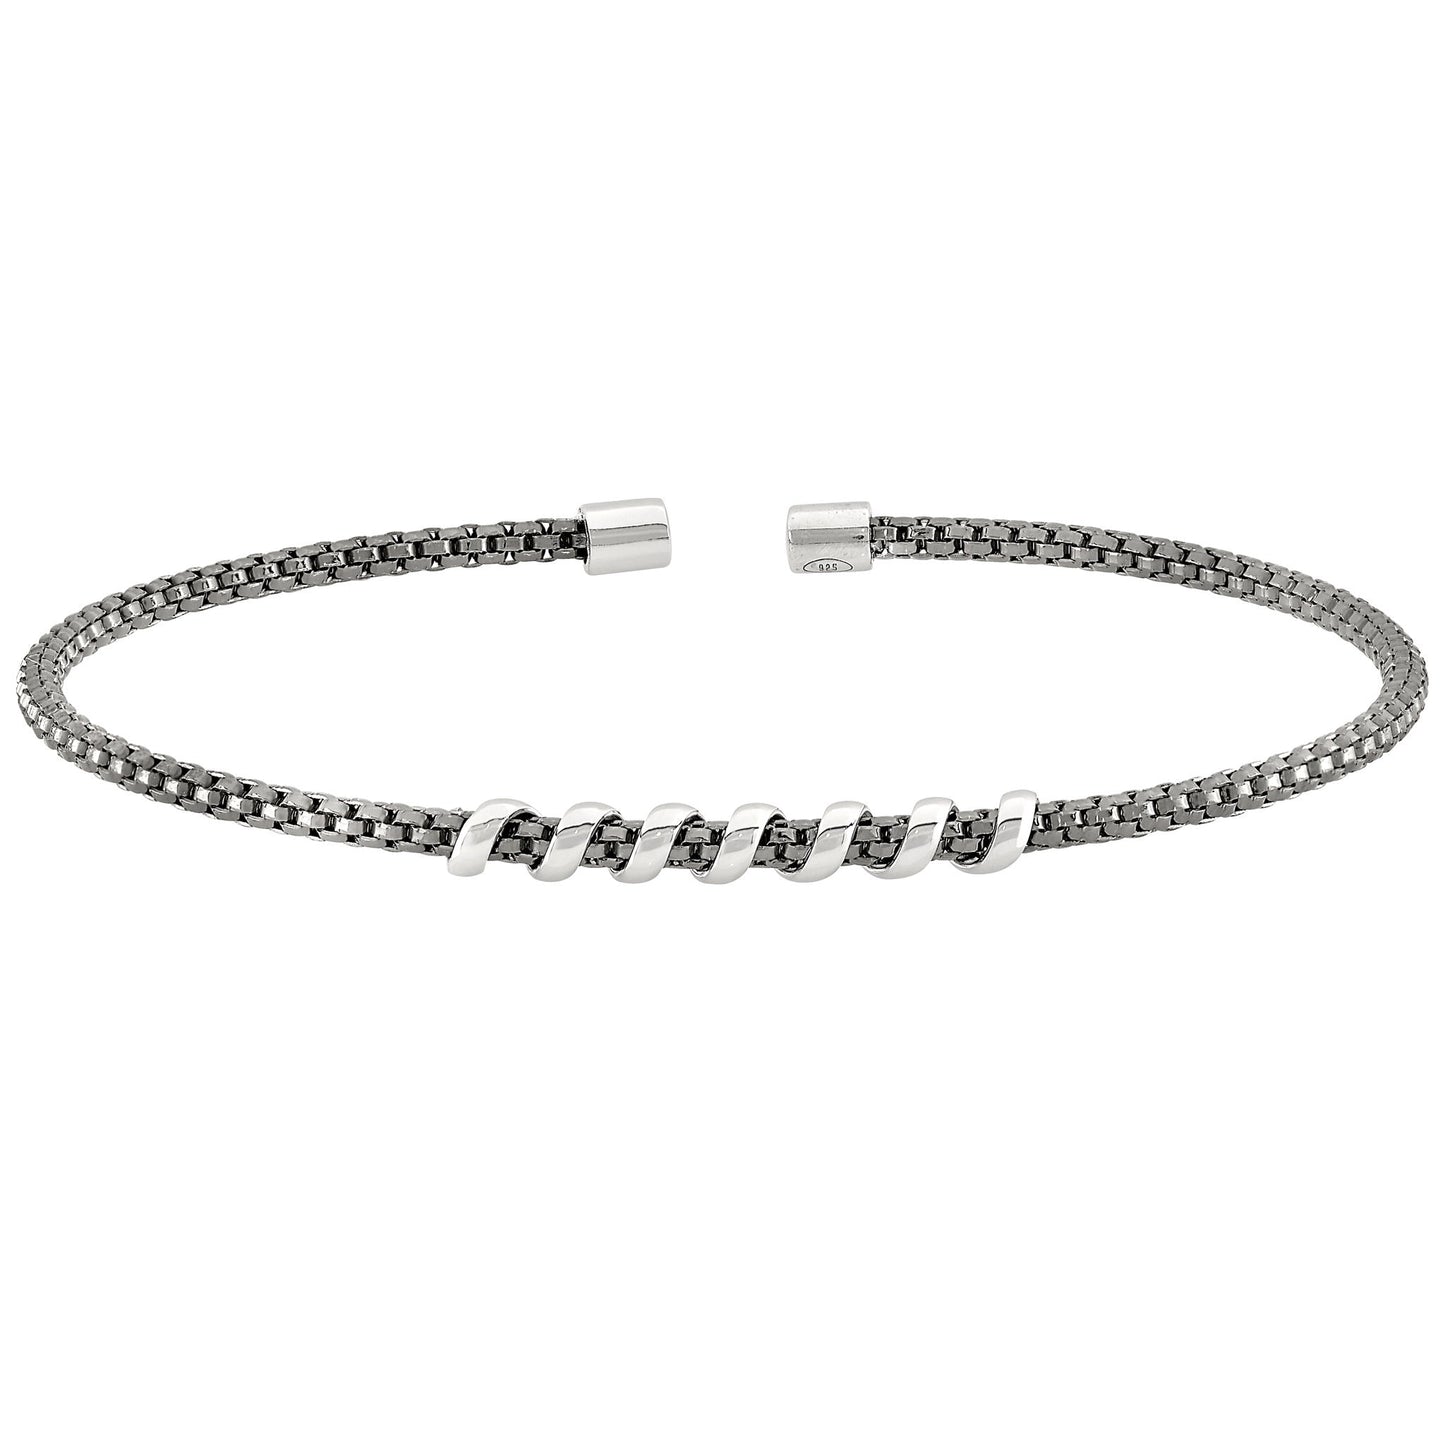 A spiral wrapped box link flexible cable bracelet displayed on a neutral white background.